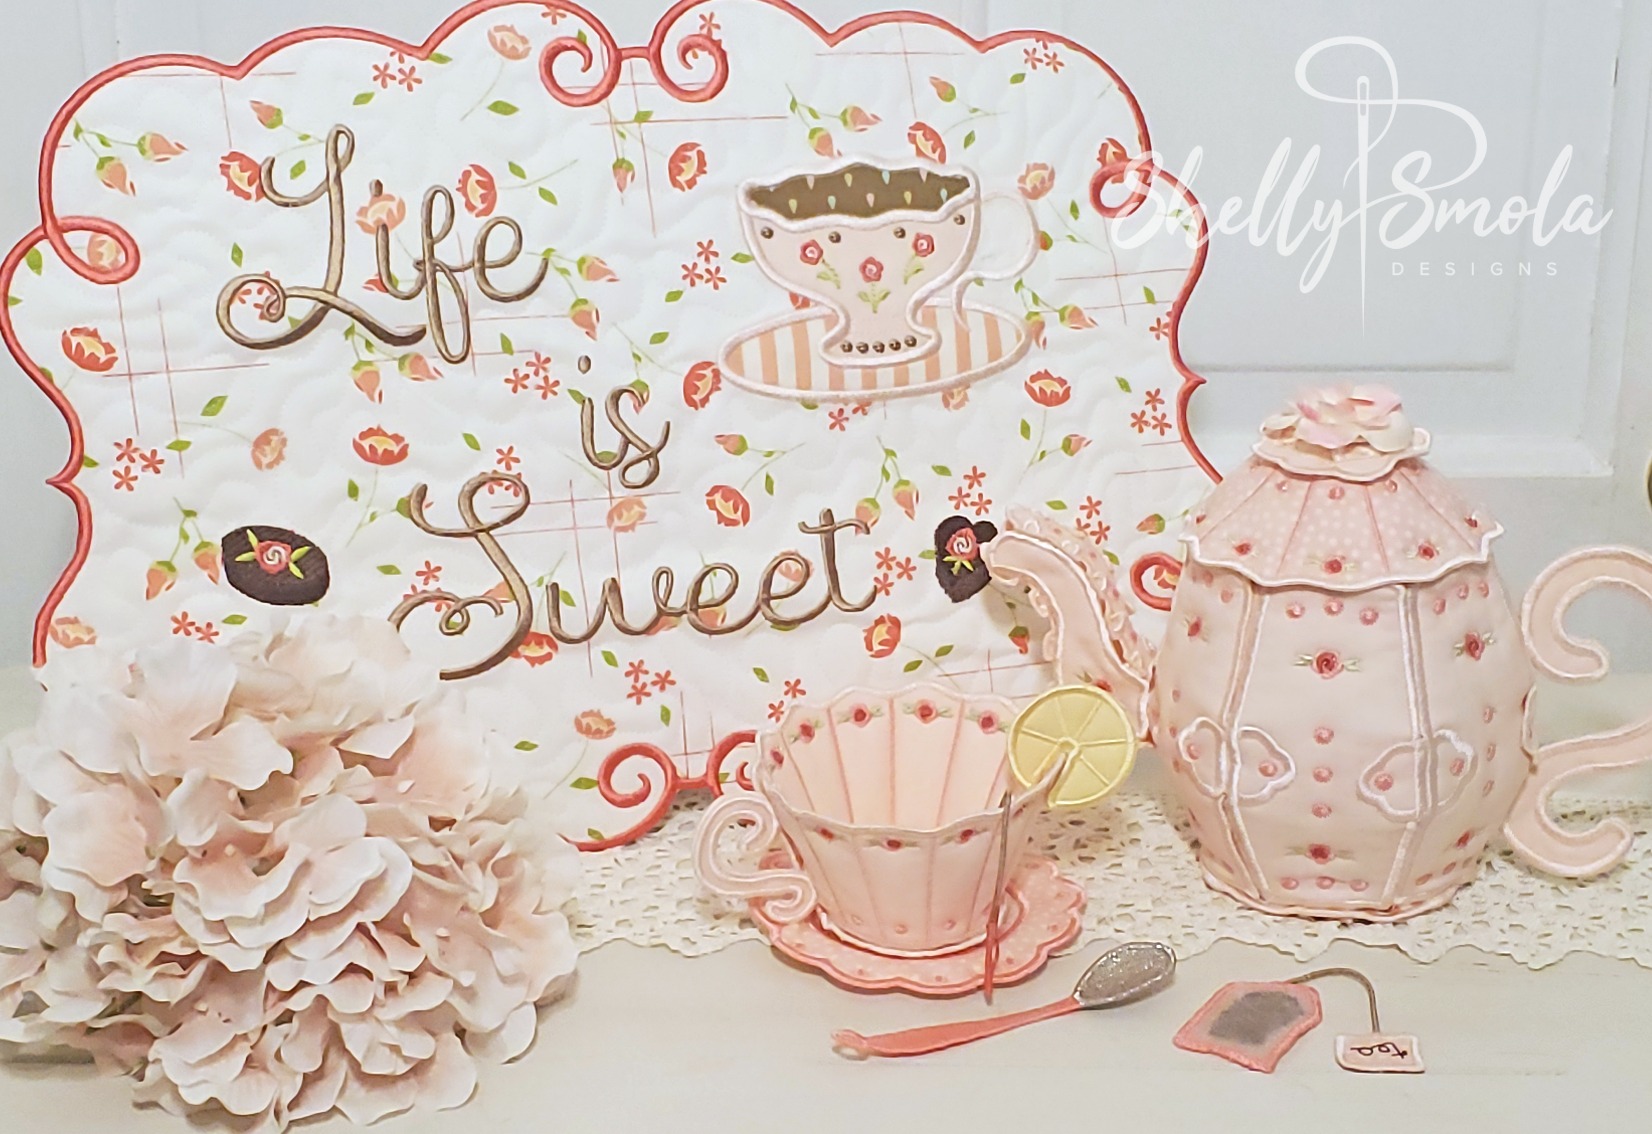 Life is Sweet Placemat by Shelly Smola